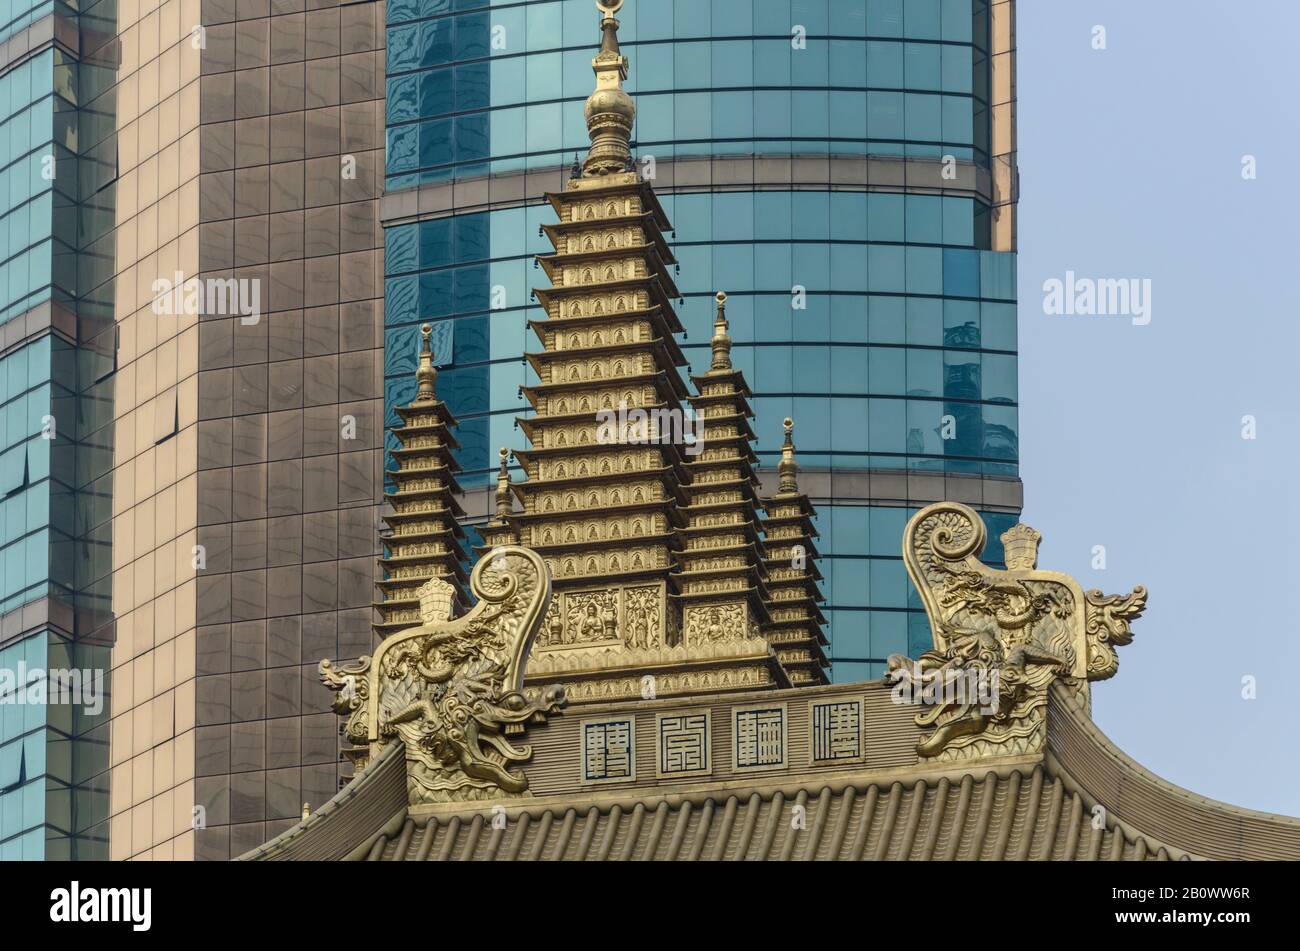 Architecture, Jing'an Temple, Shanghai, China, Asia Stock Photo